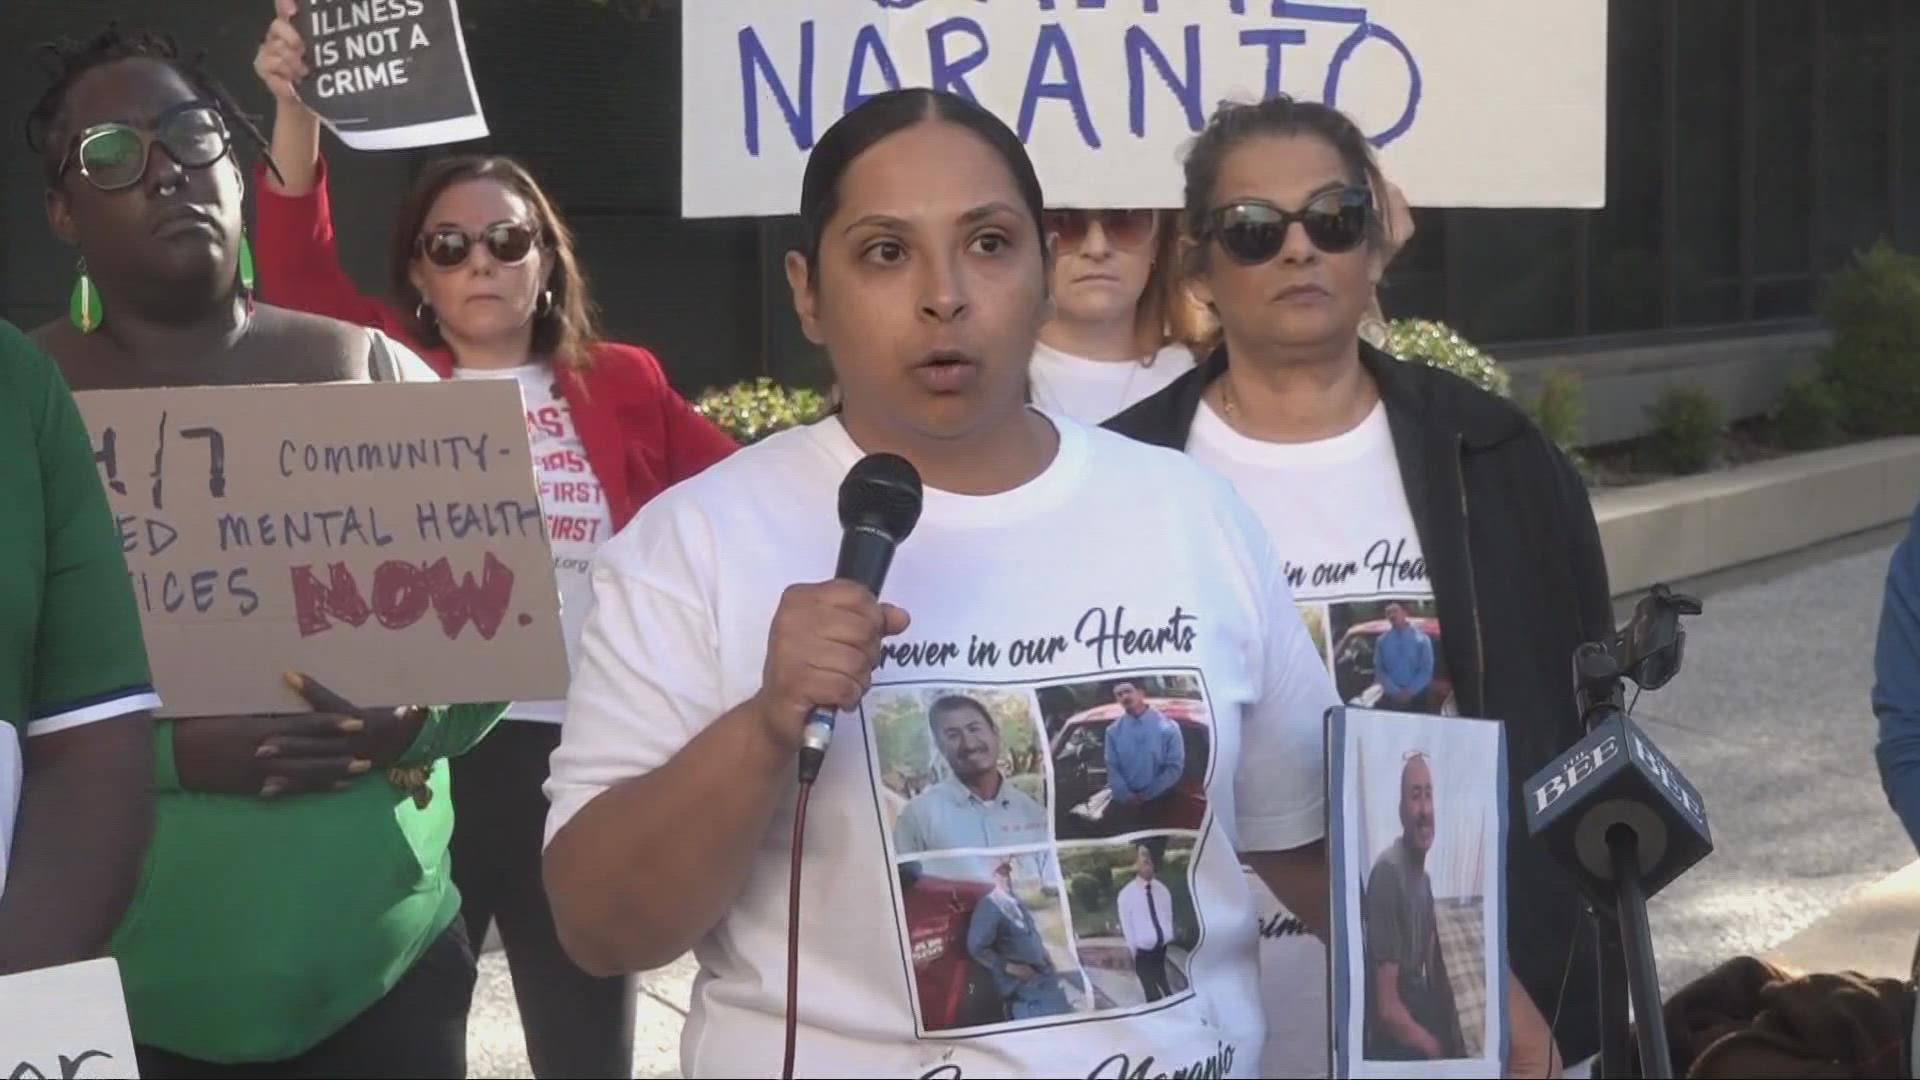 Acosta Naranjo describes a doting father who loved to fish and always pushed her to do her best. She says her father was experiencing a mental health crisis.